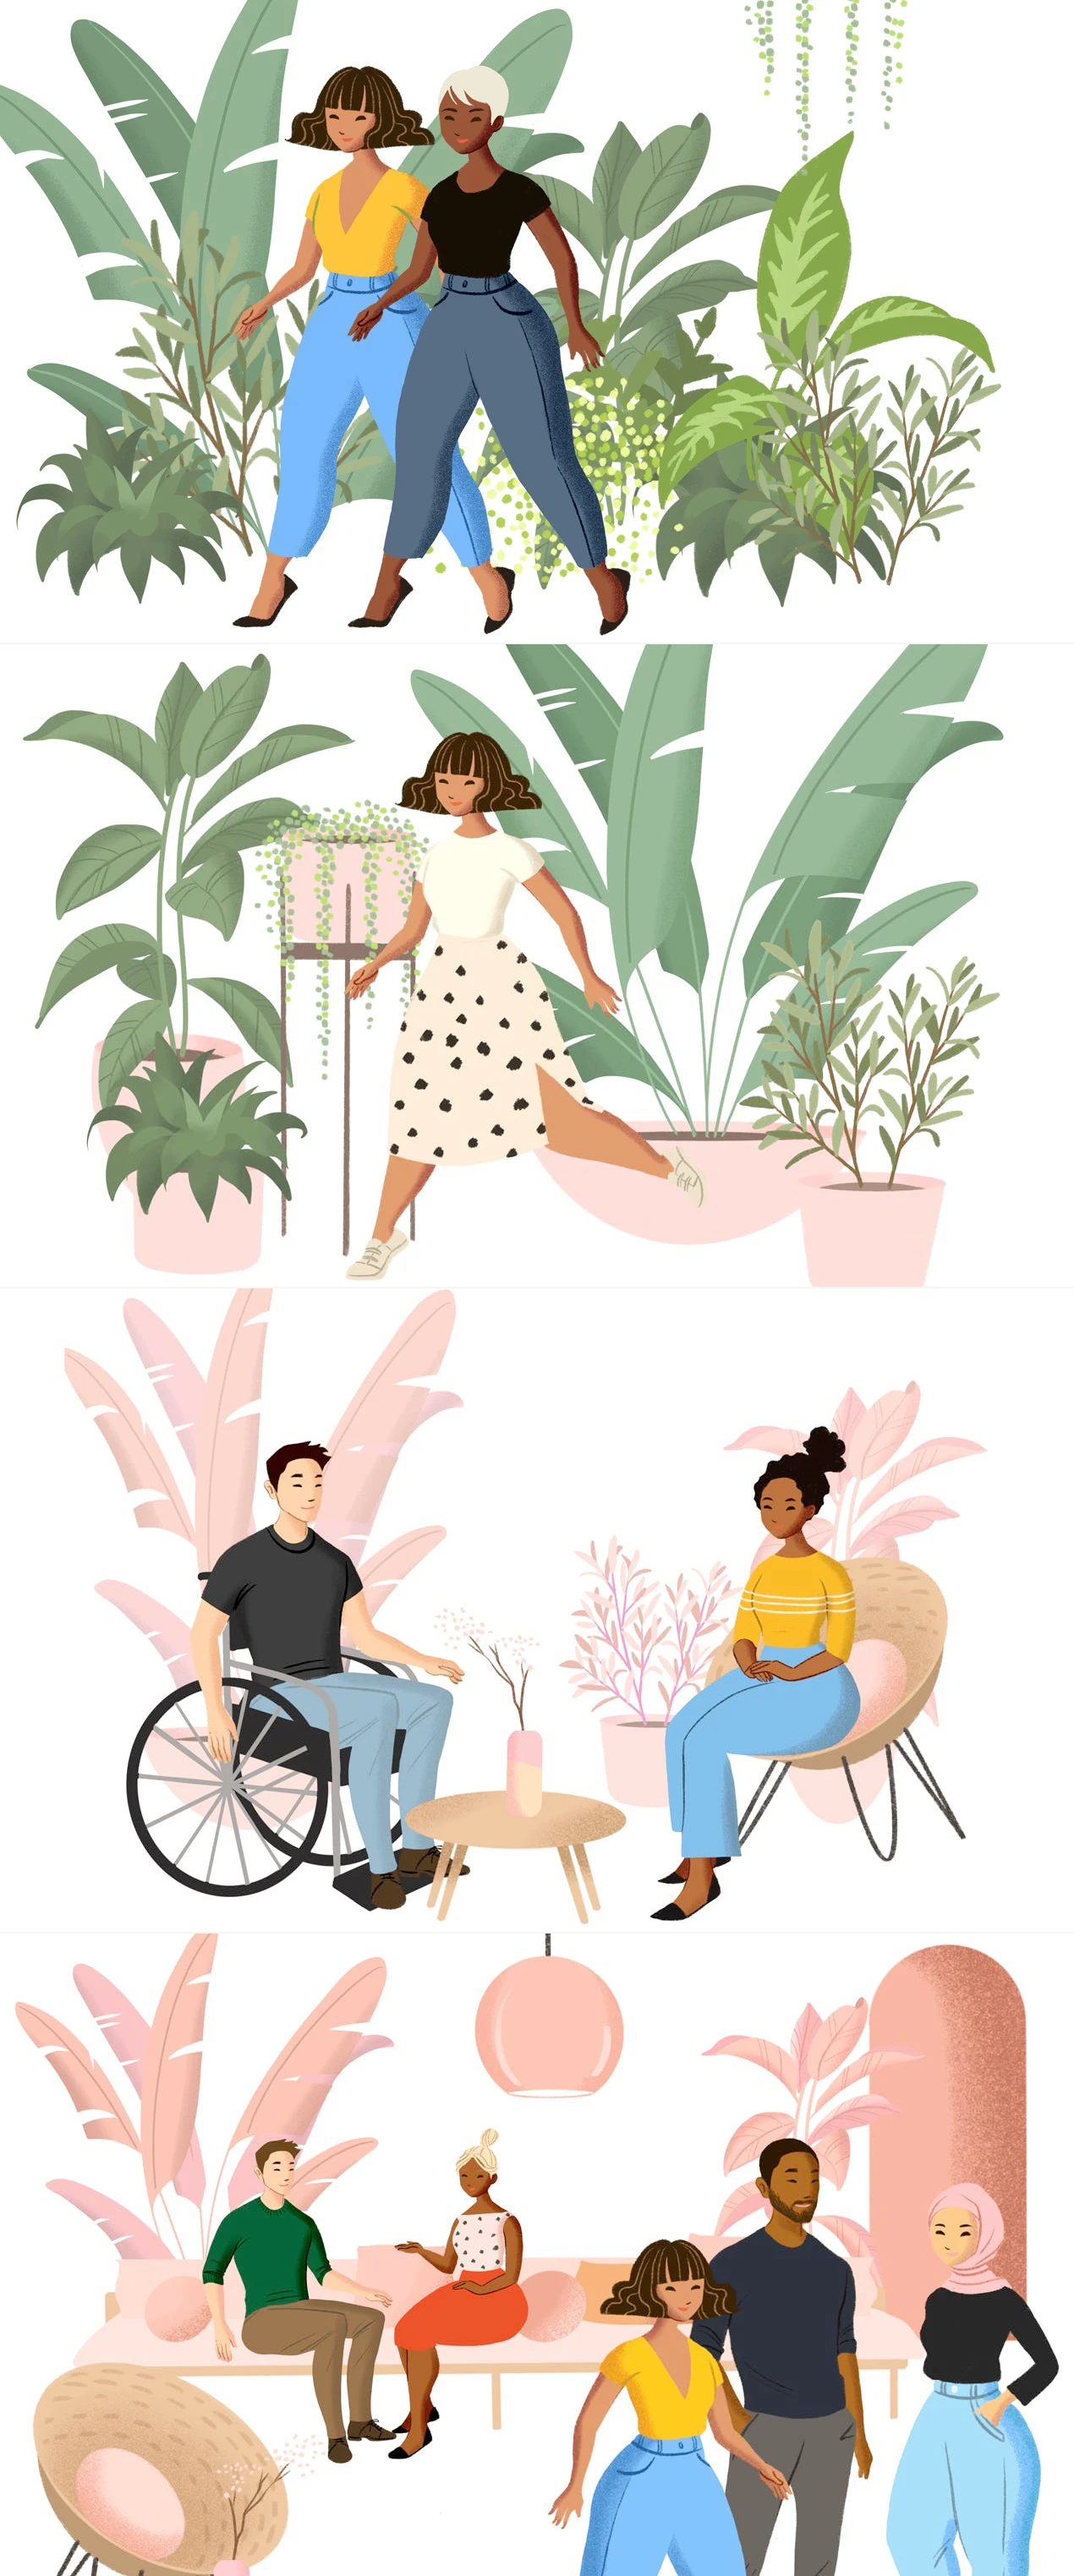 Fresh Folk Illustration Library - An illustration library of people and objects